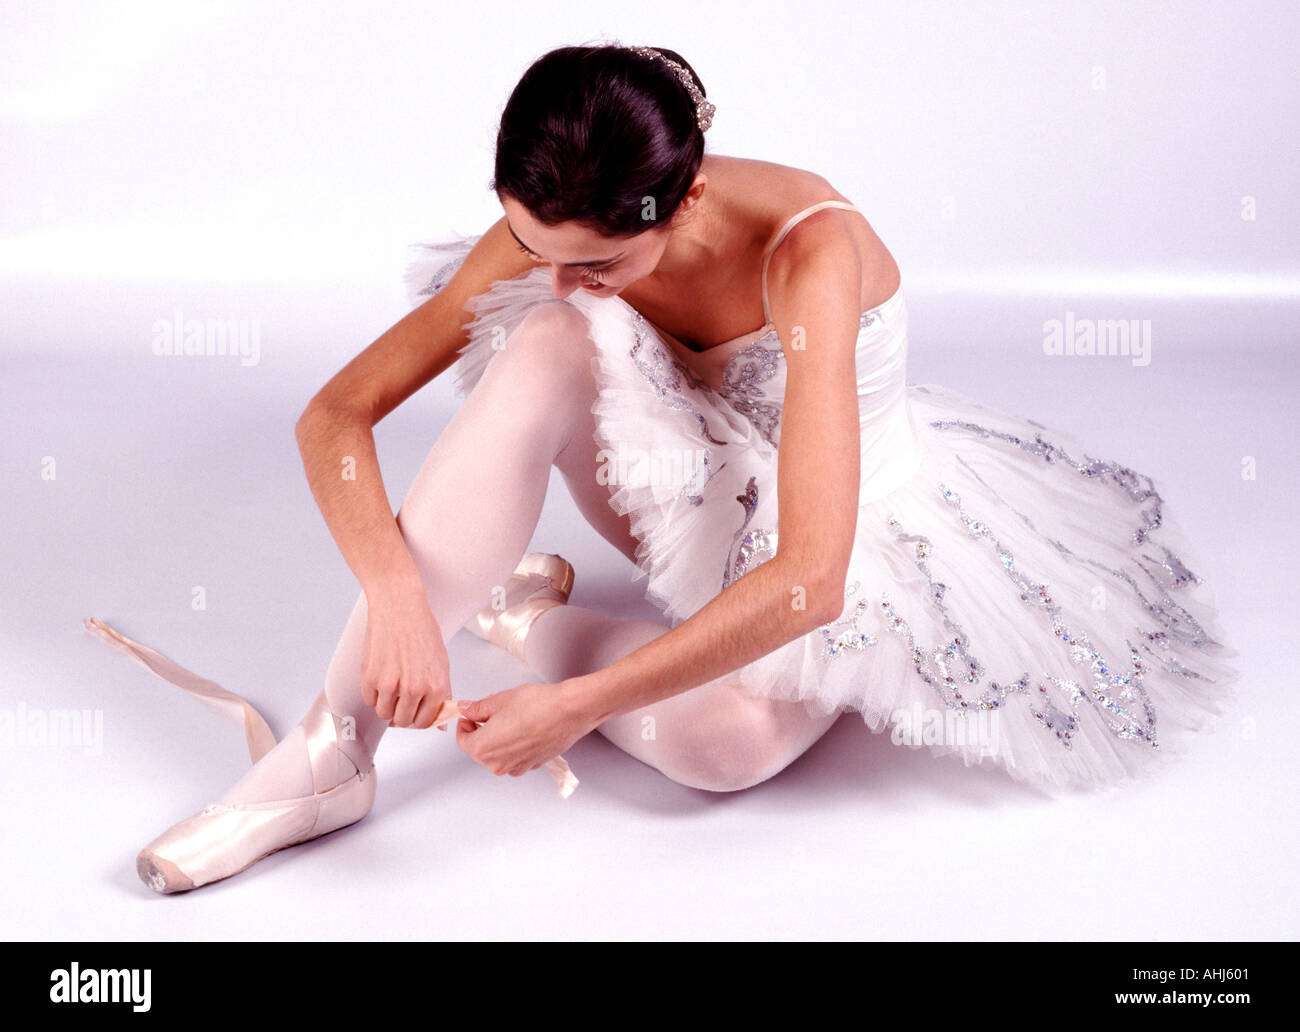 Ballerina rehearsal ballet dancer stage performance cut out cropped white background outline cutout Stock Photo